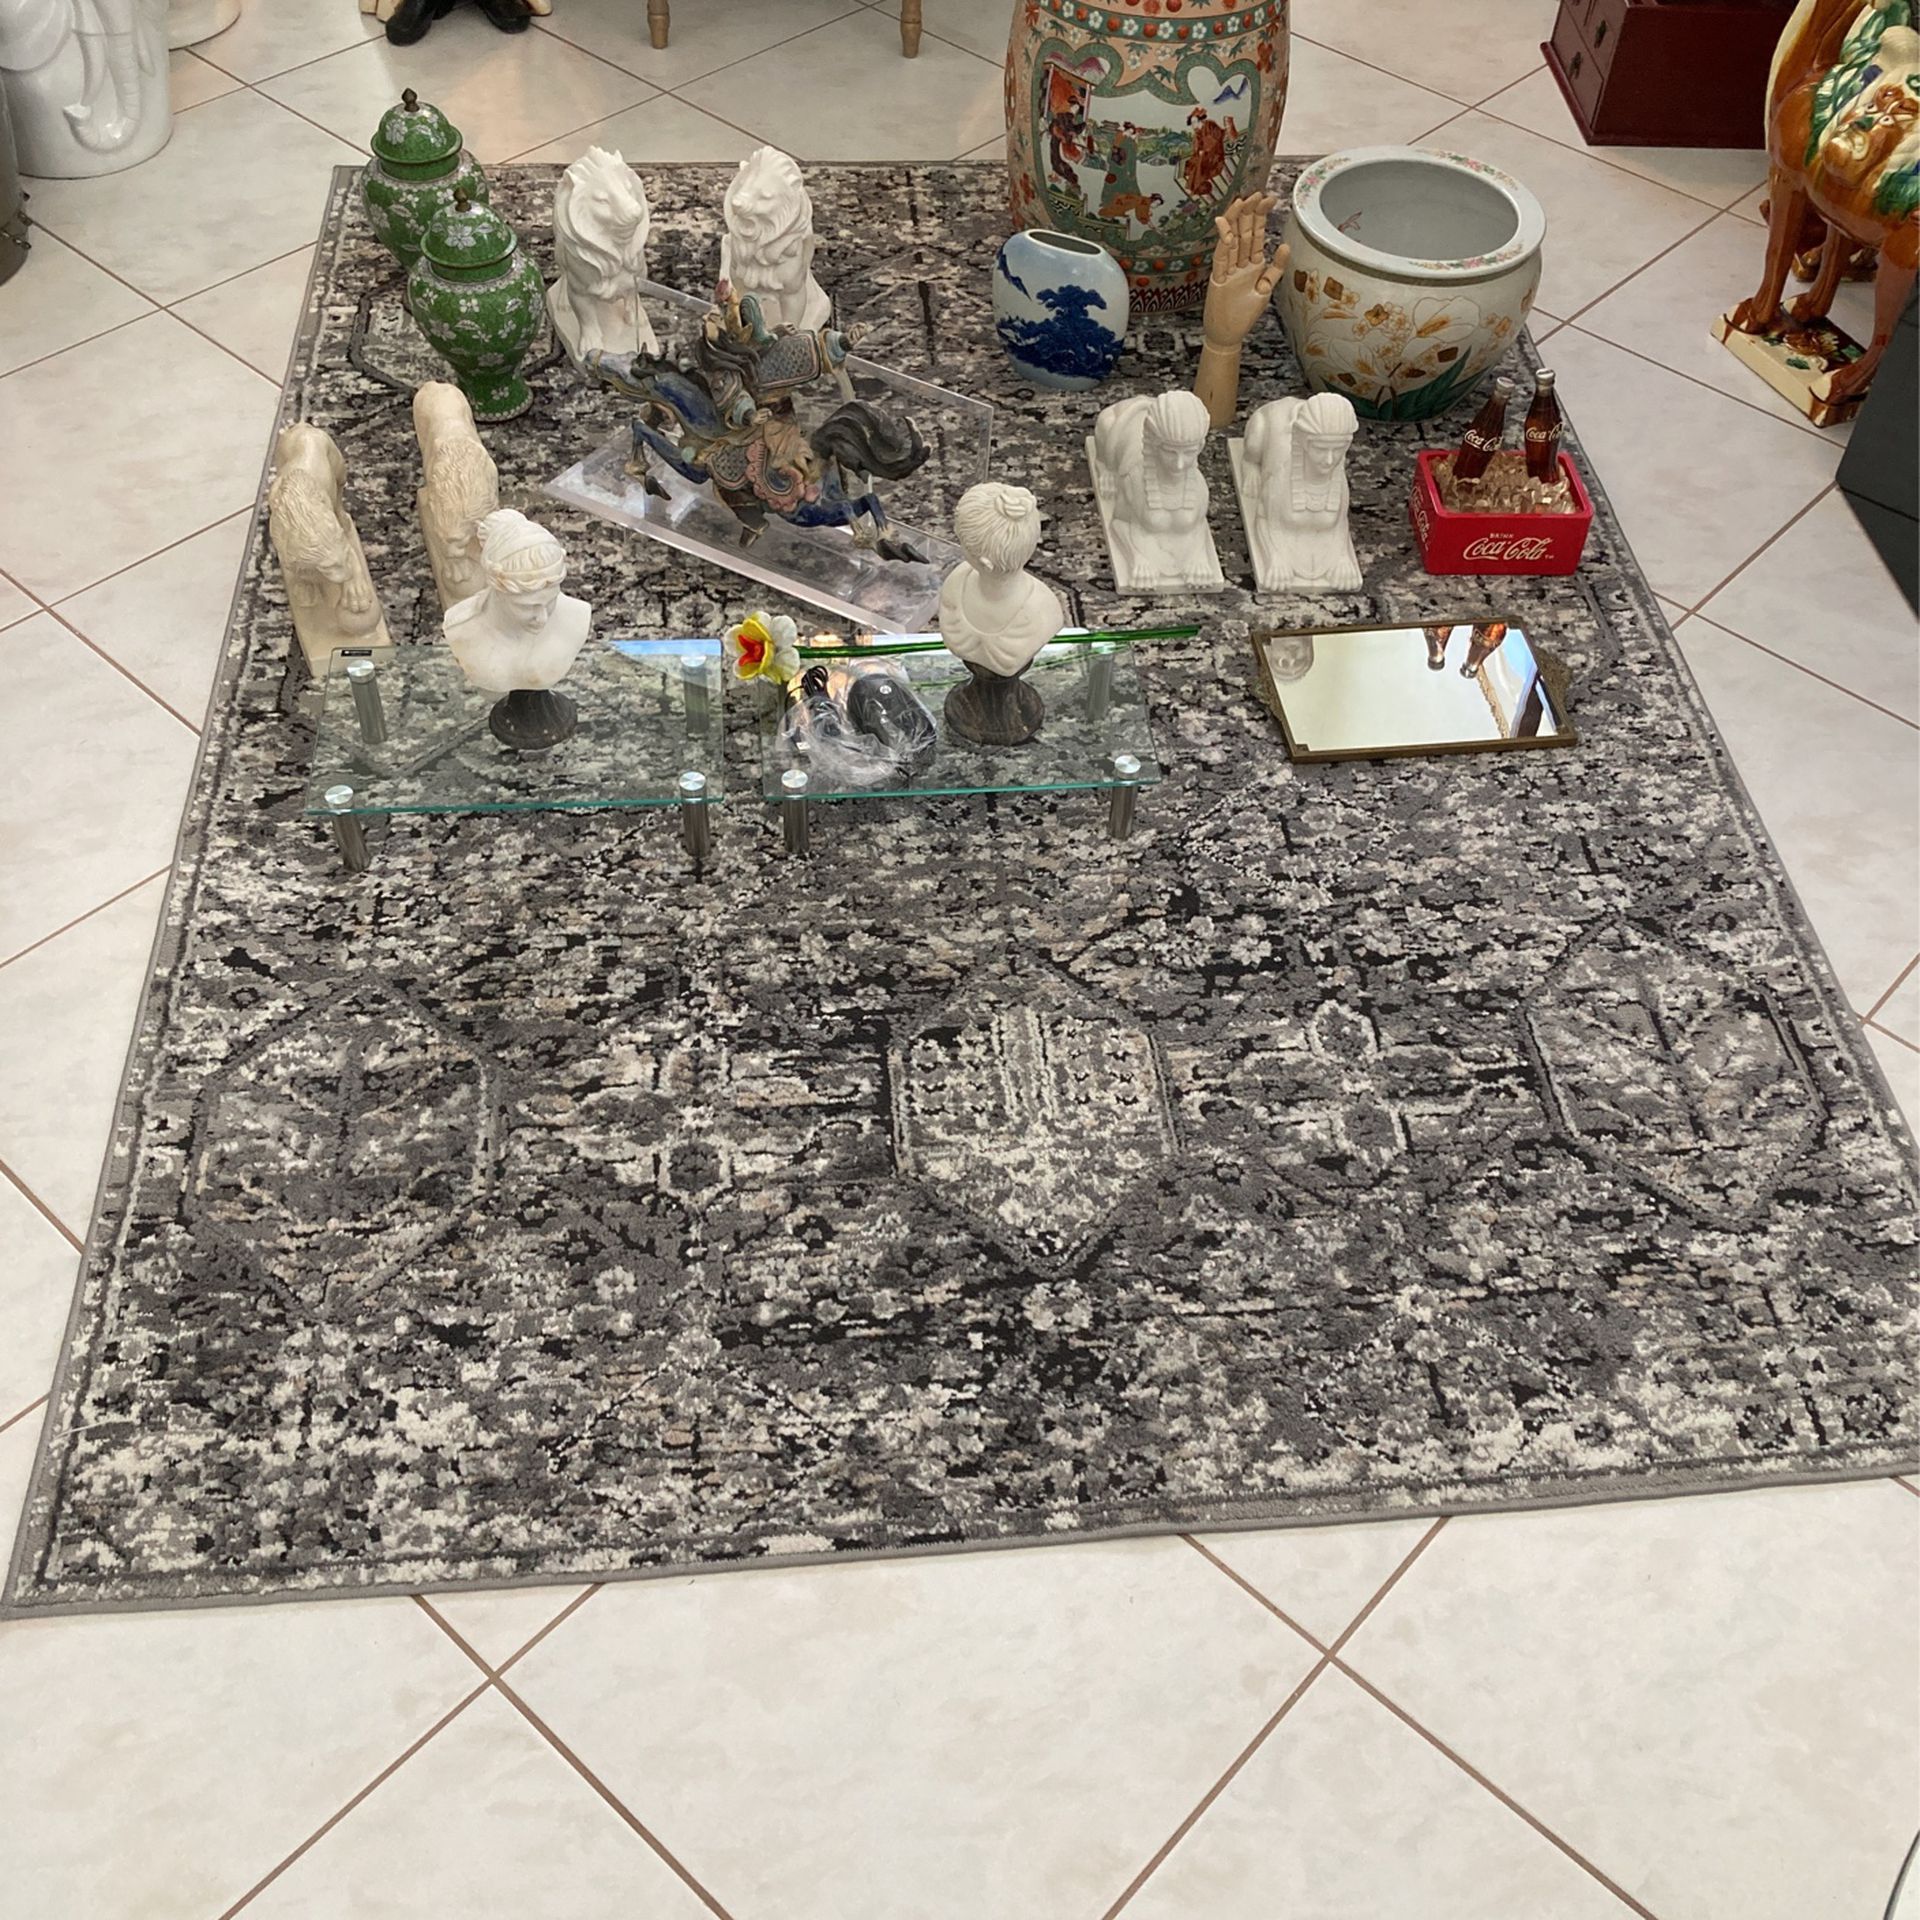 ETSIE 5’3”  X 7’ Carpet Rug Grey - Charcoal With A Tad Of Tan Beige.  Never Used $40 Firm.  Everything Else Priced Separately. 